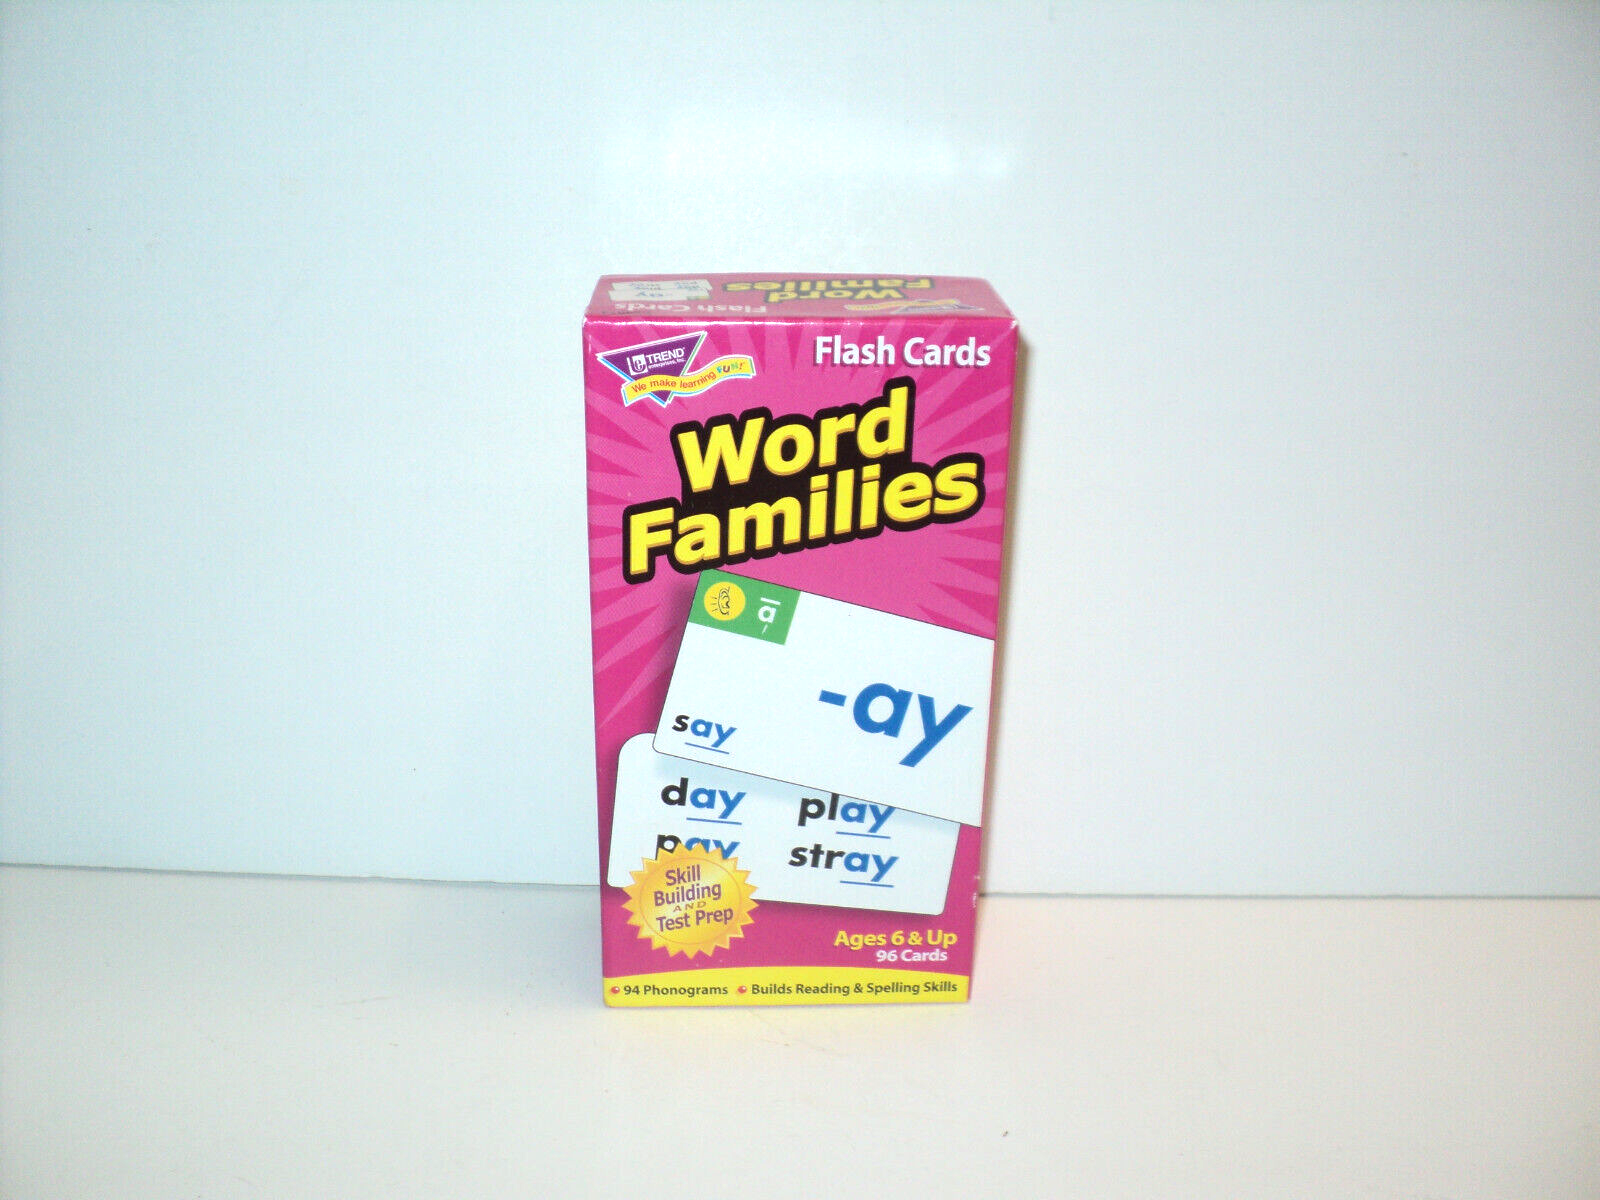 Word Families Flash Cards by Trend Enterprises 94 Phonogram Cards Ages 6 and Up - $12.13